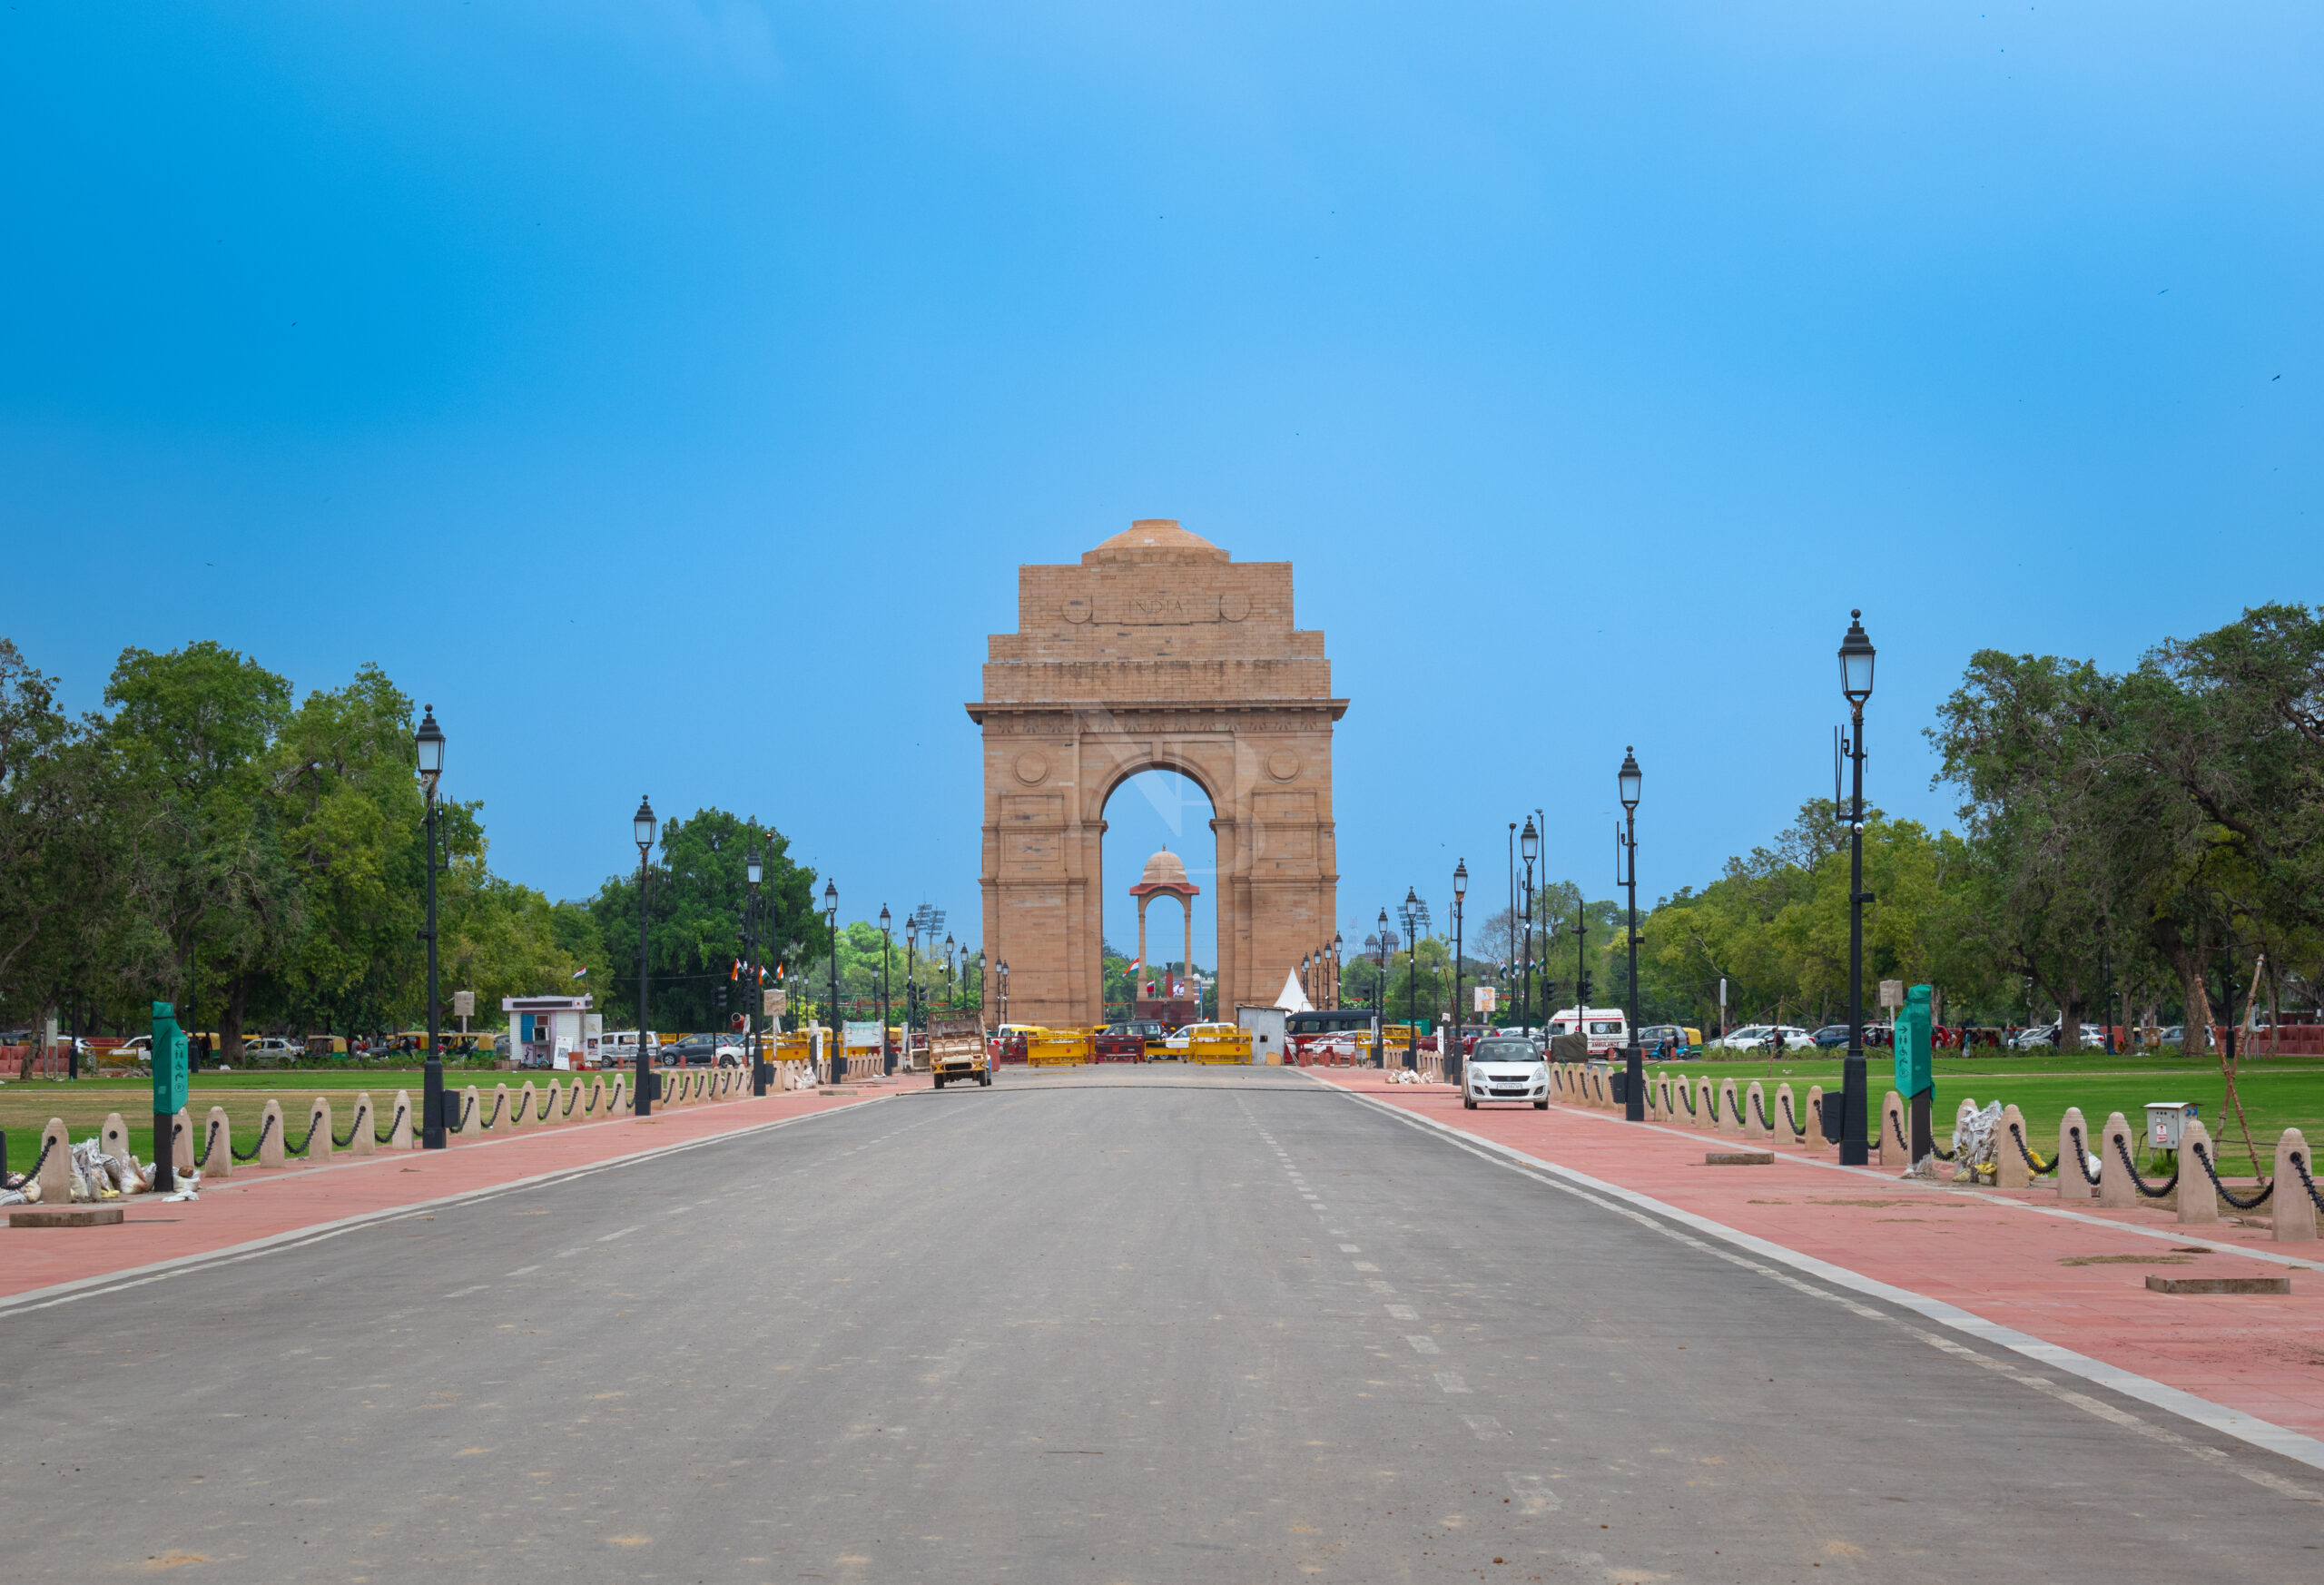 You are currently viewing New Delhi day tour – Places to visit in one day within budget